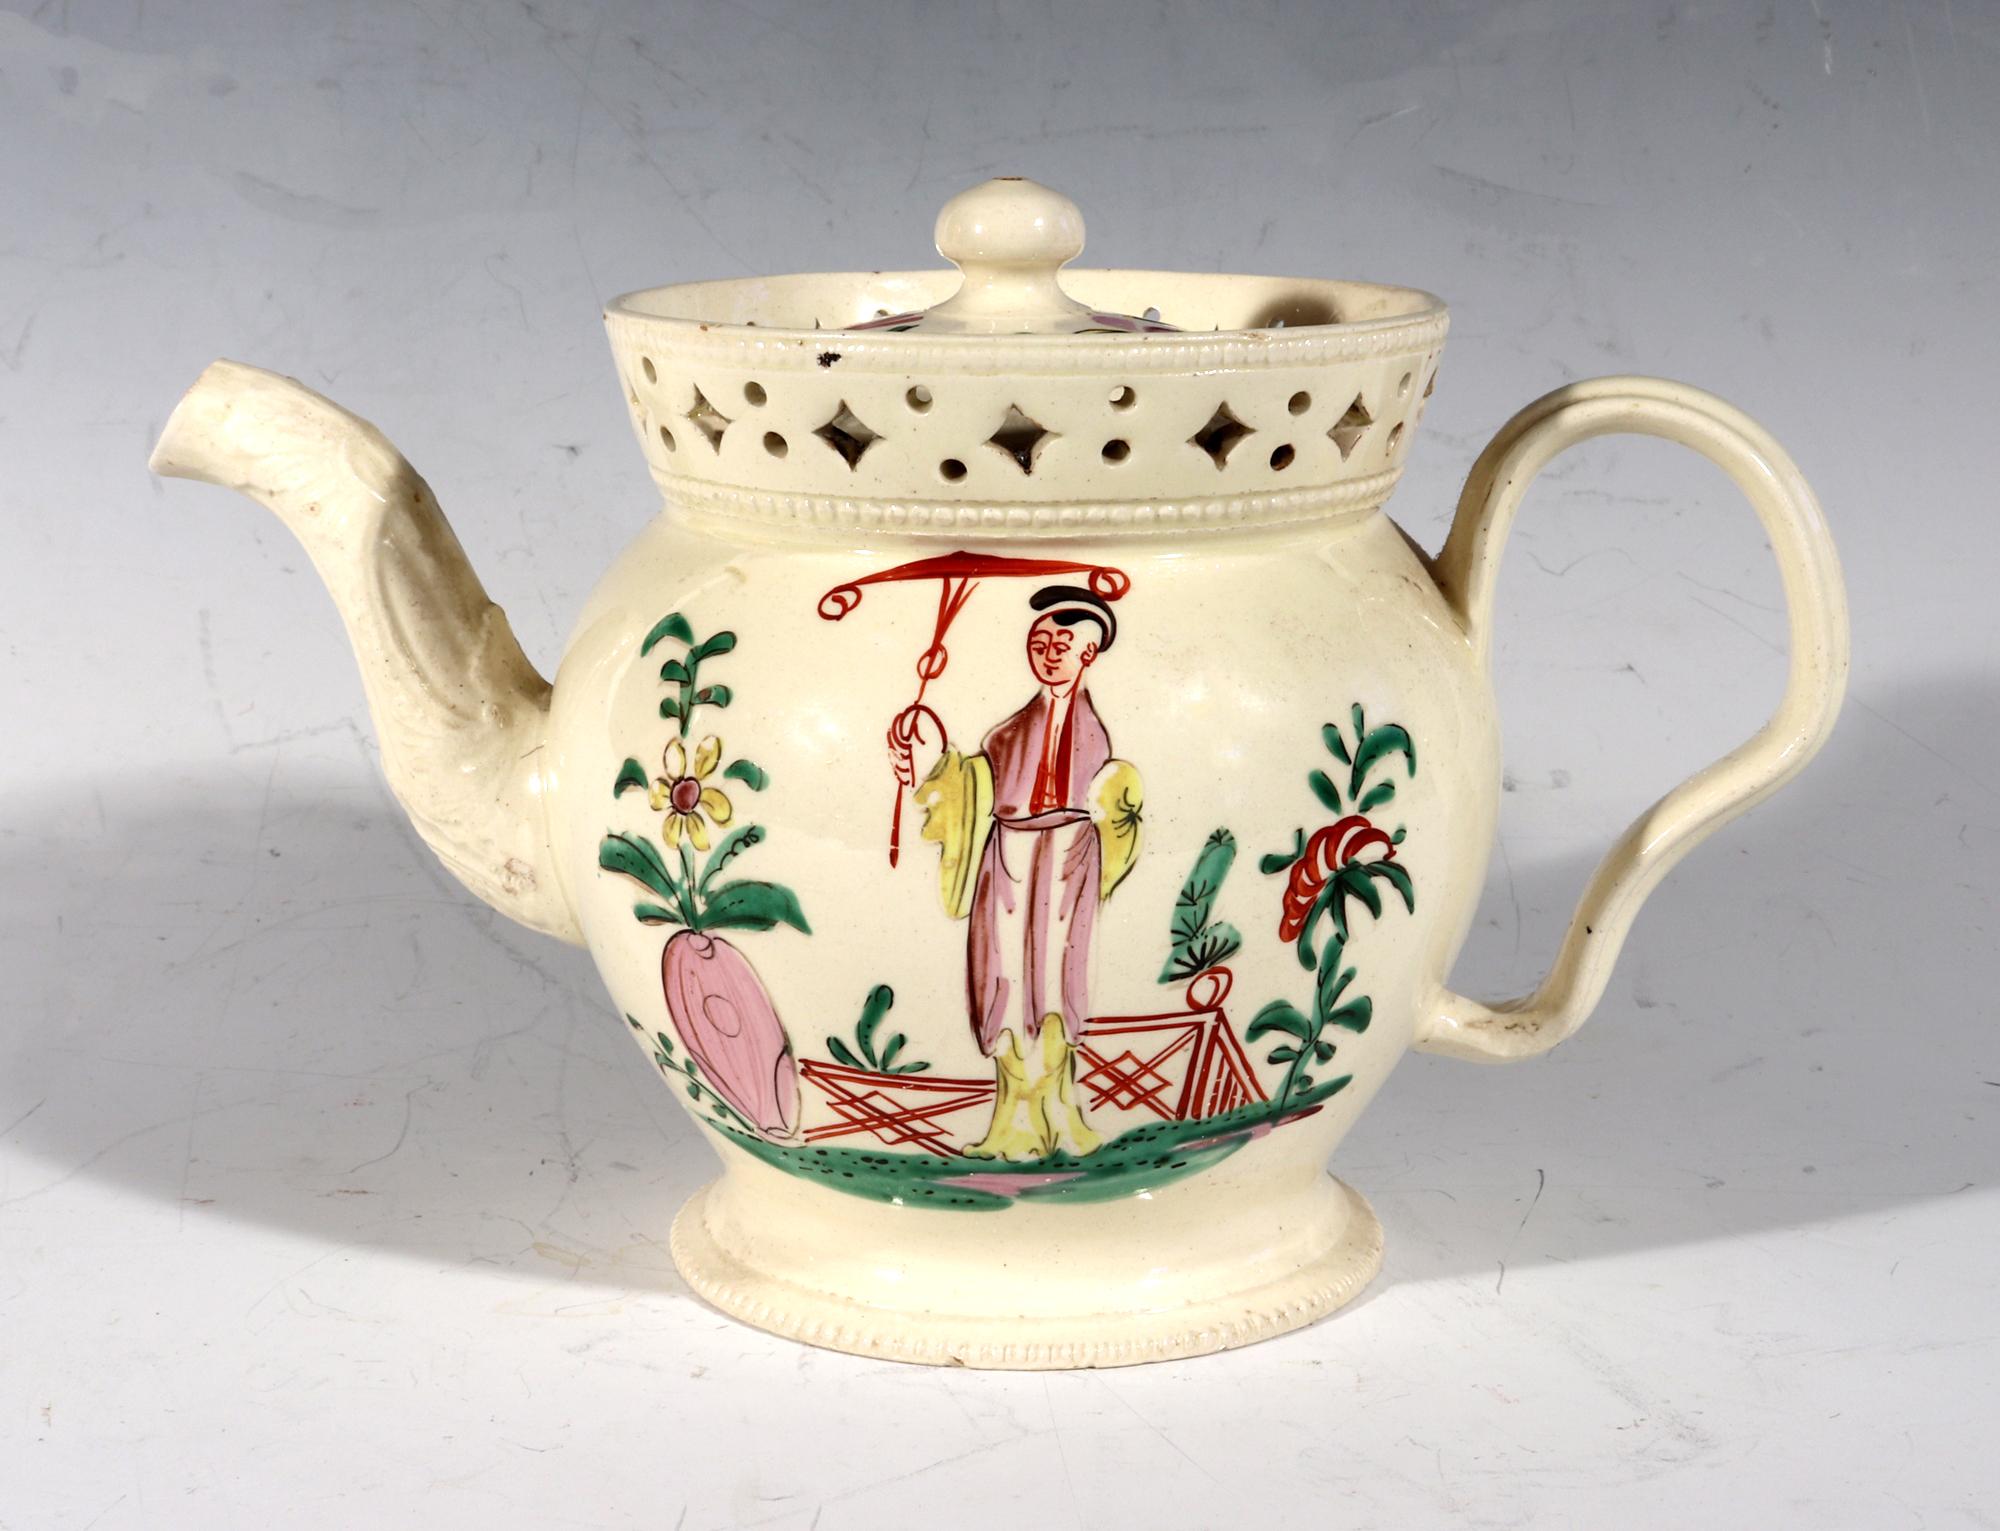 English creamware Chinoiserie teapot & cover with pierced galleried rim.
Circa 1775.

The circular English creamware teapot with two designs front and back. The front has a Chinoiserie painting of a Chinese lady with parasol in a garden setting